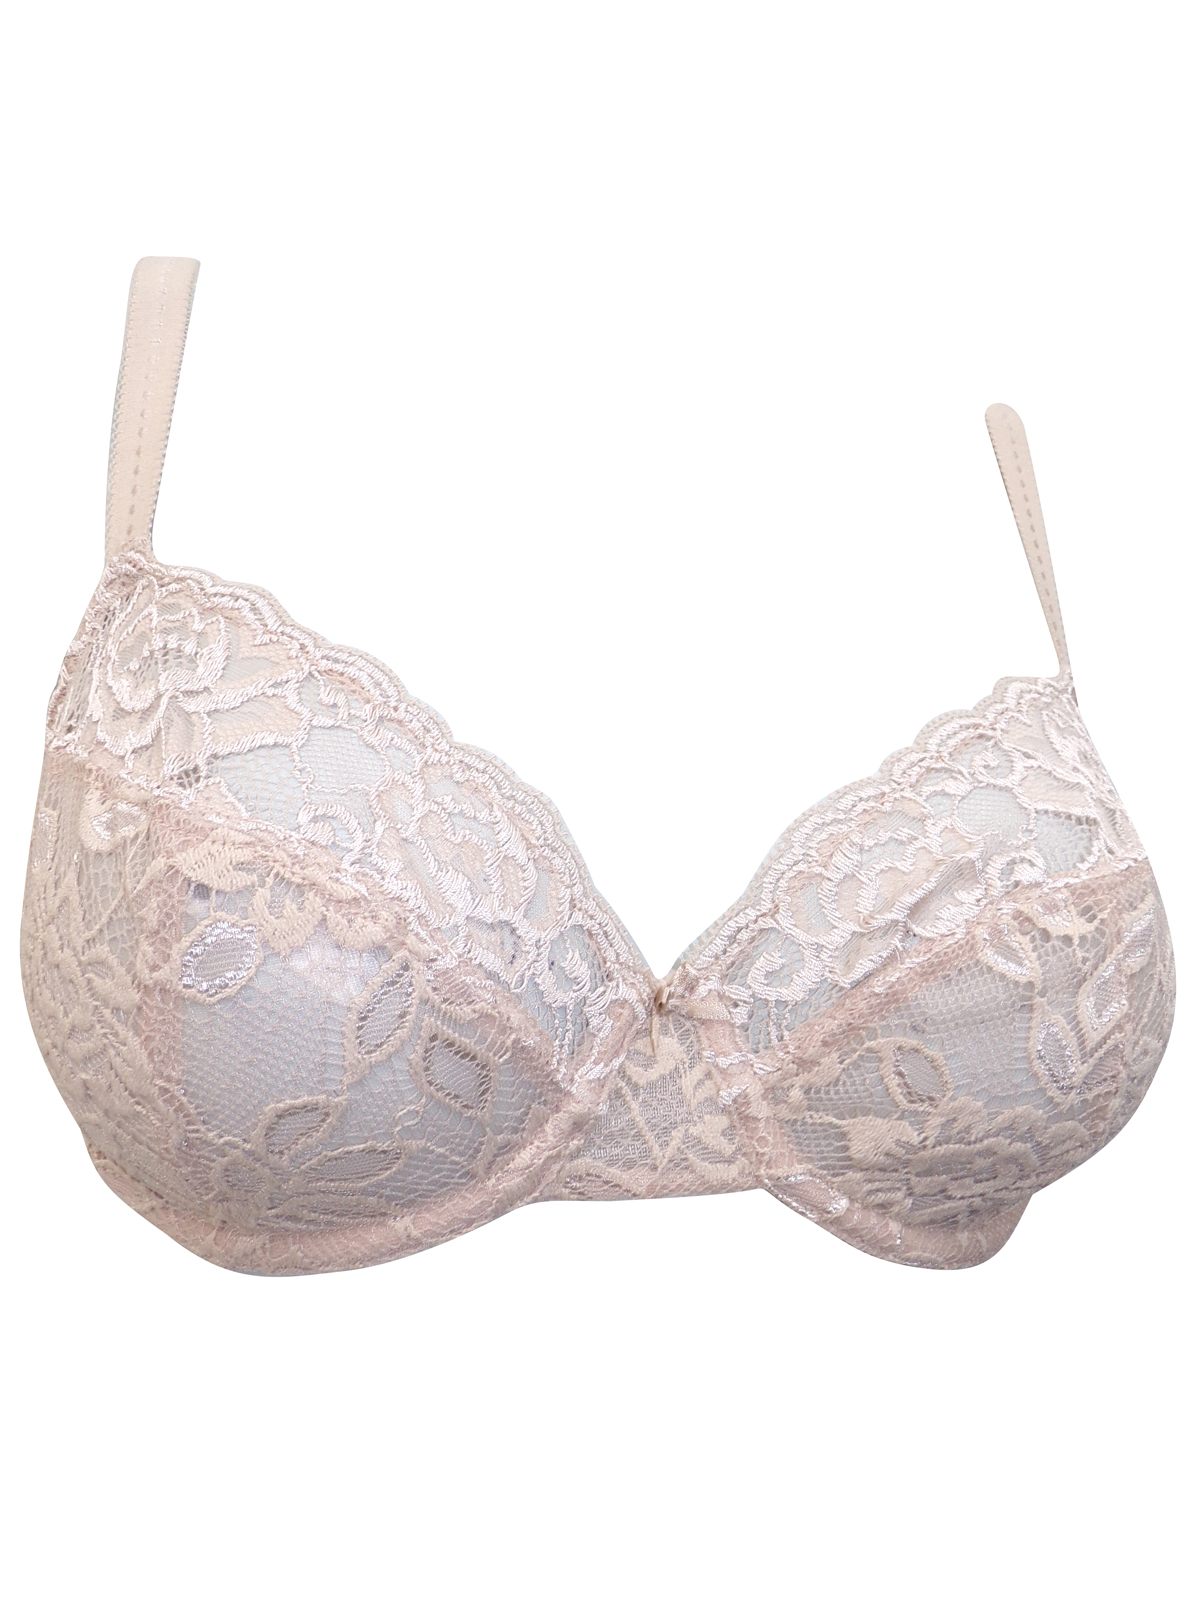 Marks and Spencer - - M&5 NUDE Isabella All Over Lace Underwired Full ...